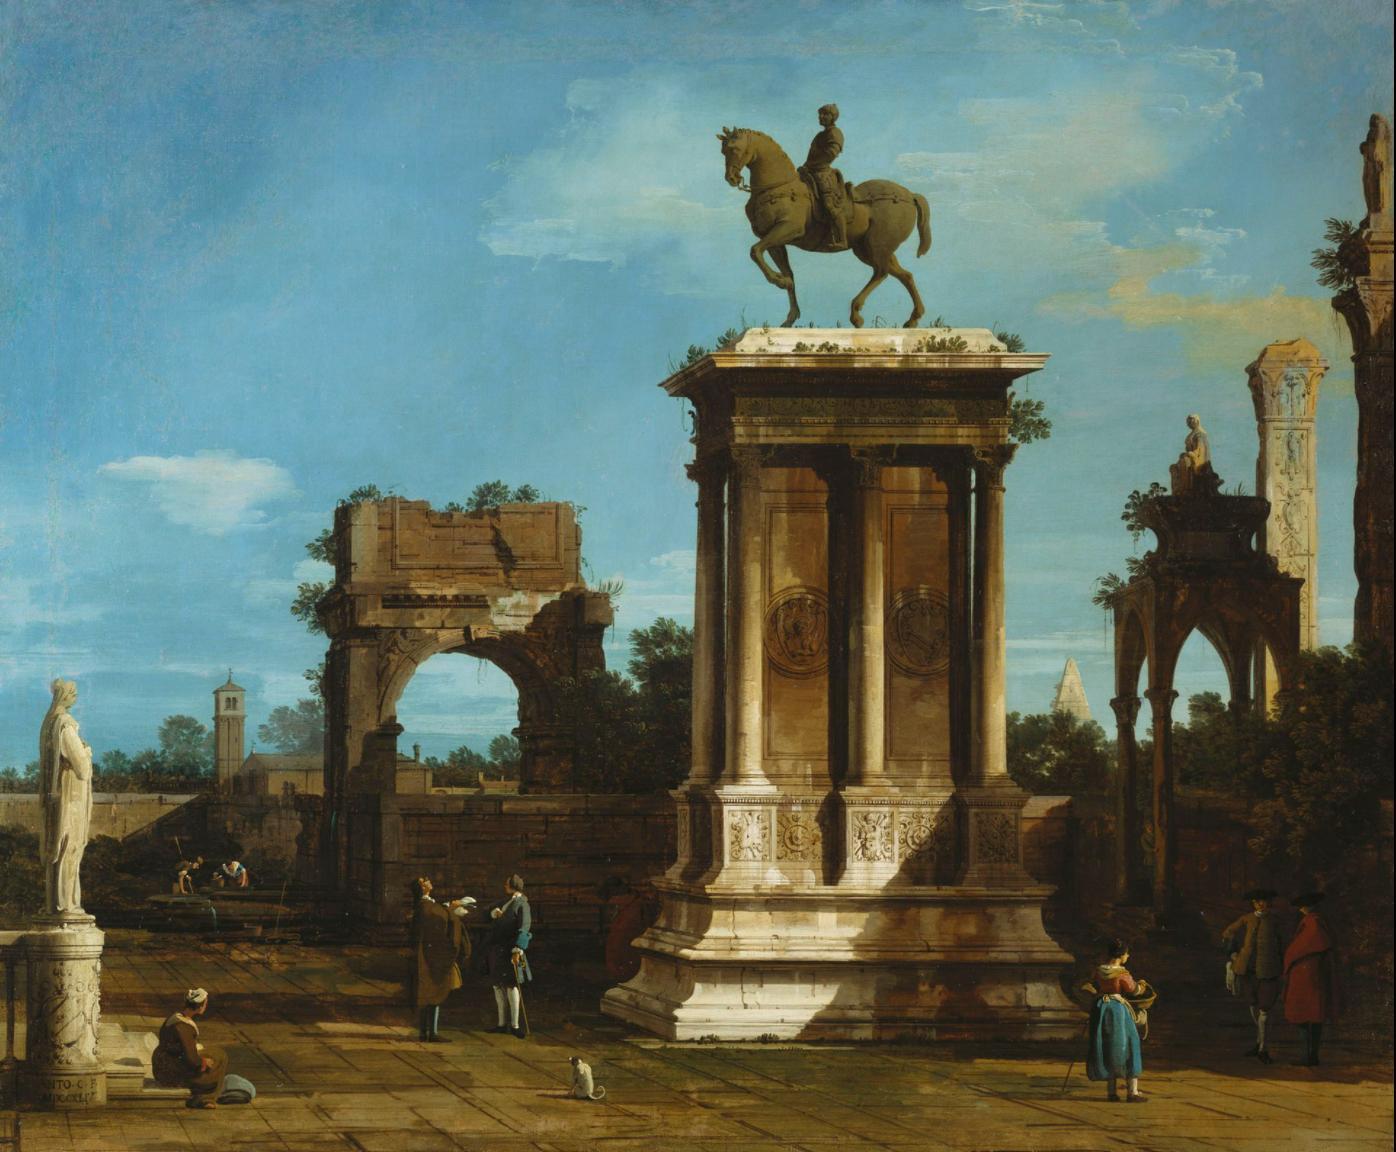 The Colleoni Monument in a Caprice Setting, Canaletto